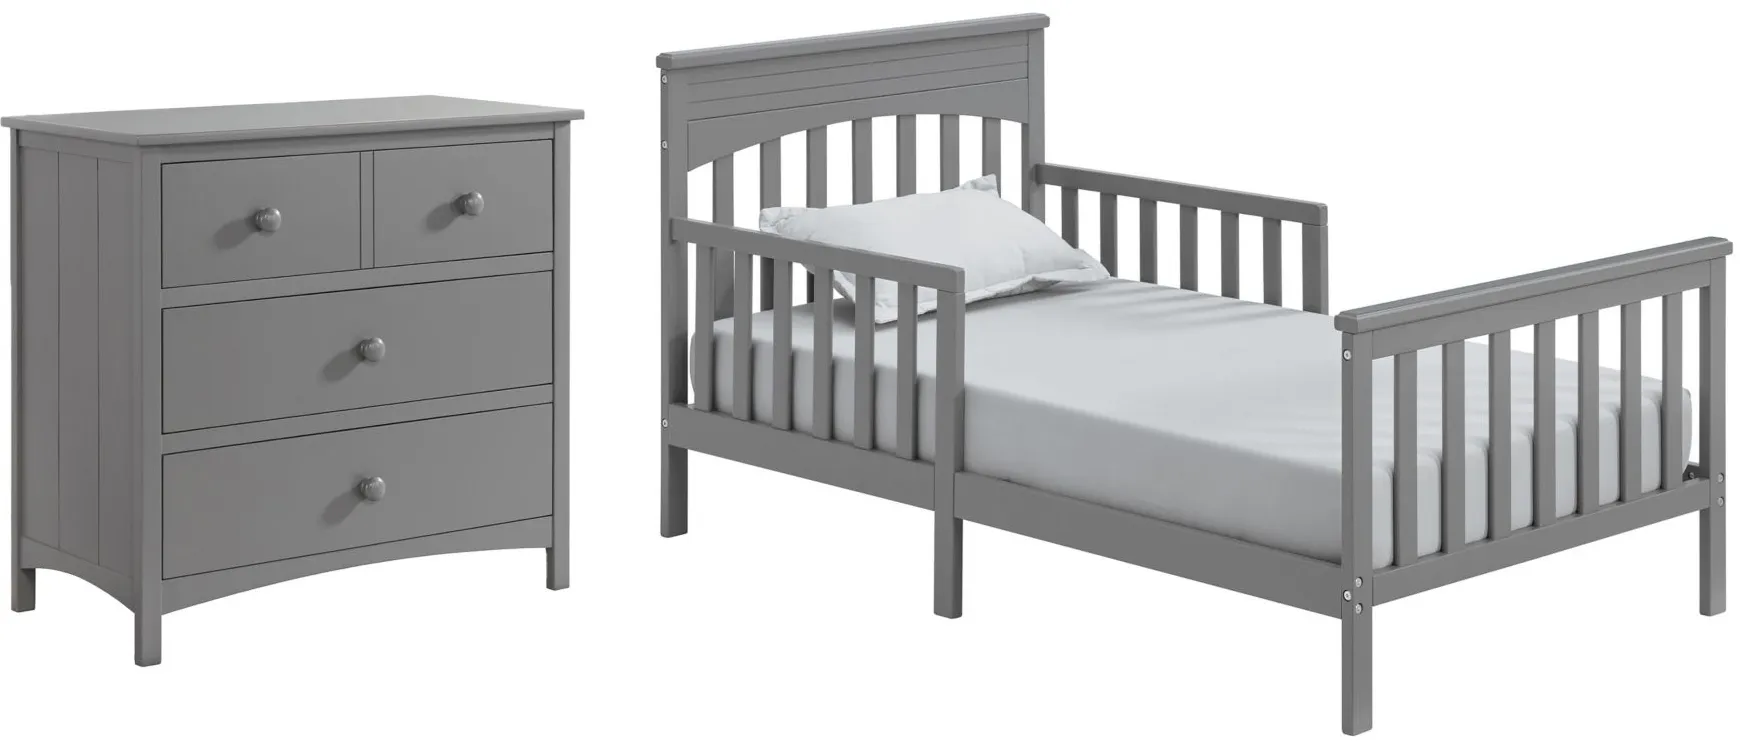 Oxford Baby Harper Toddler Bed and Dresser Set - 2 pc. in Dove Gray by M DESIGN VILLAGE